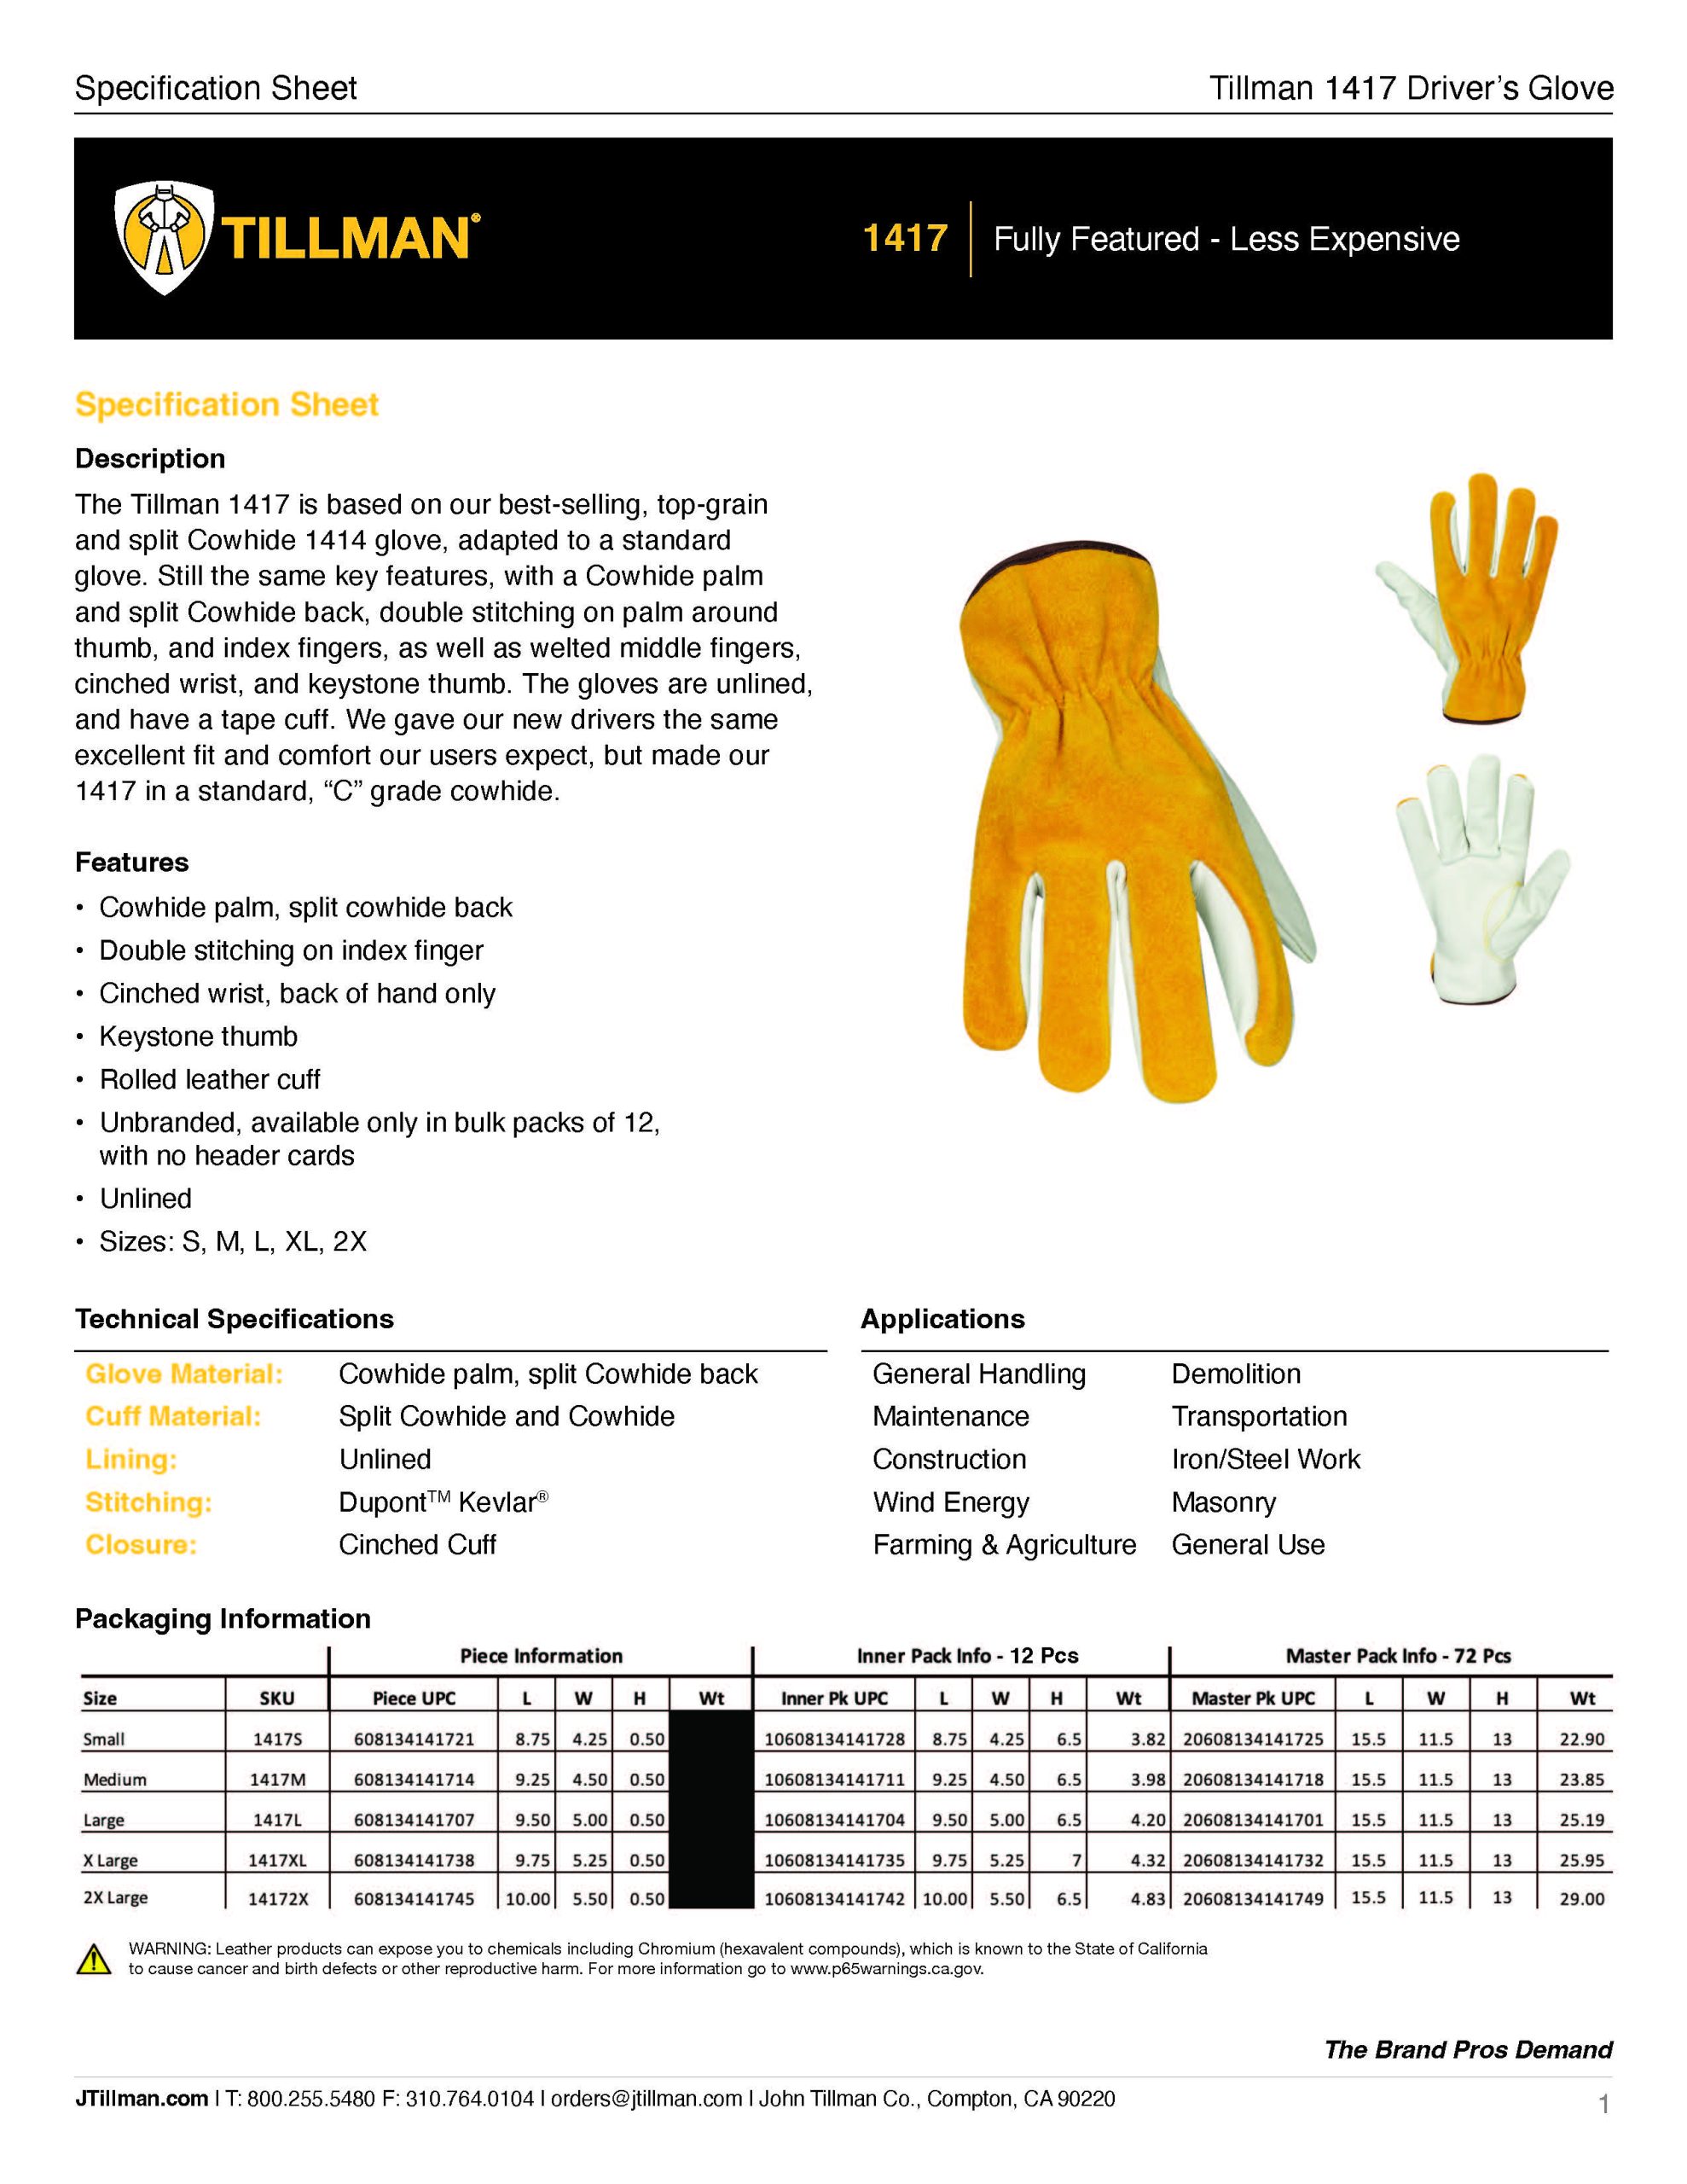 Thumbnail of 1417 Driver glove specification sheet